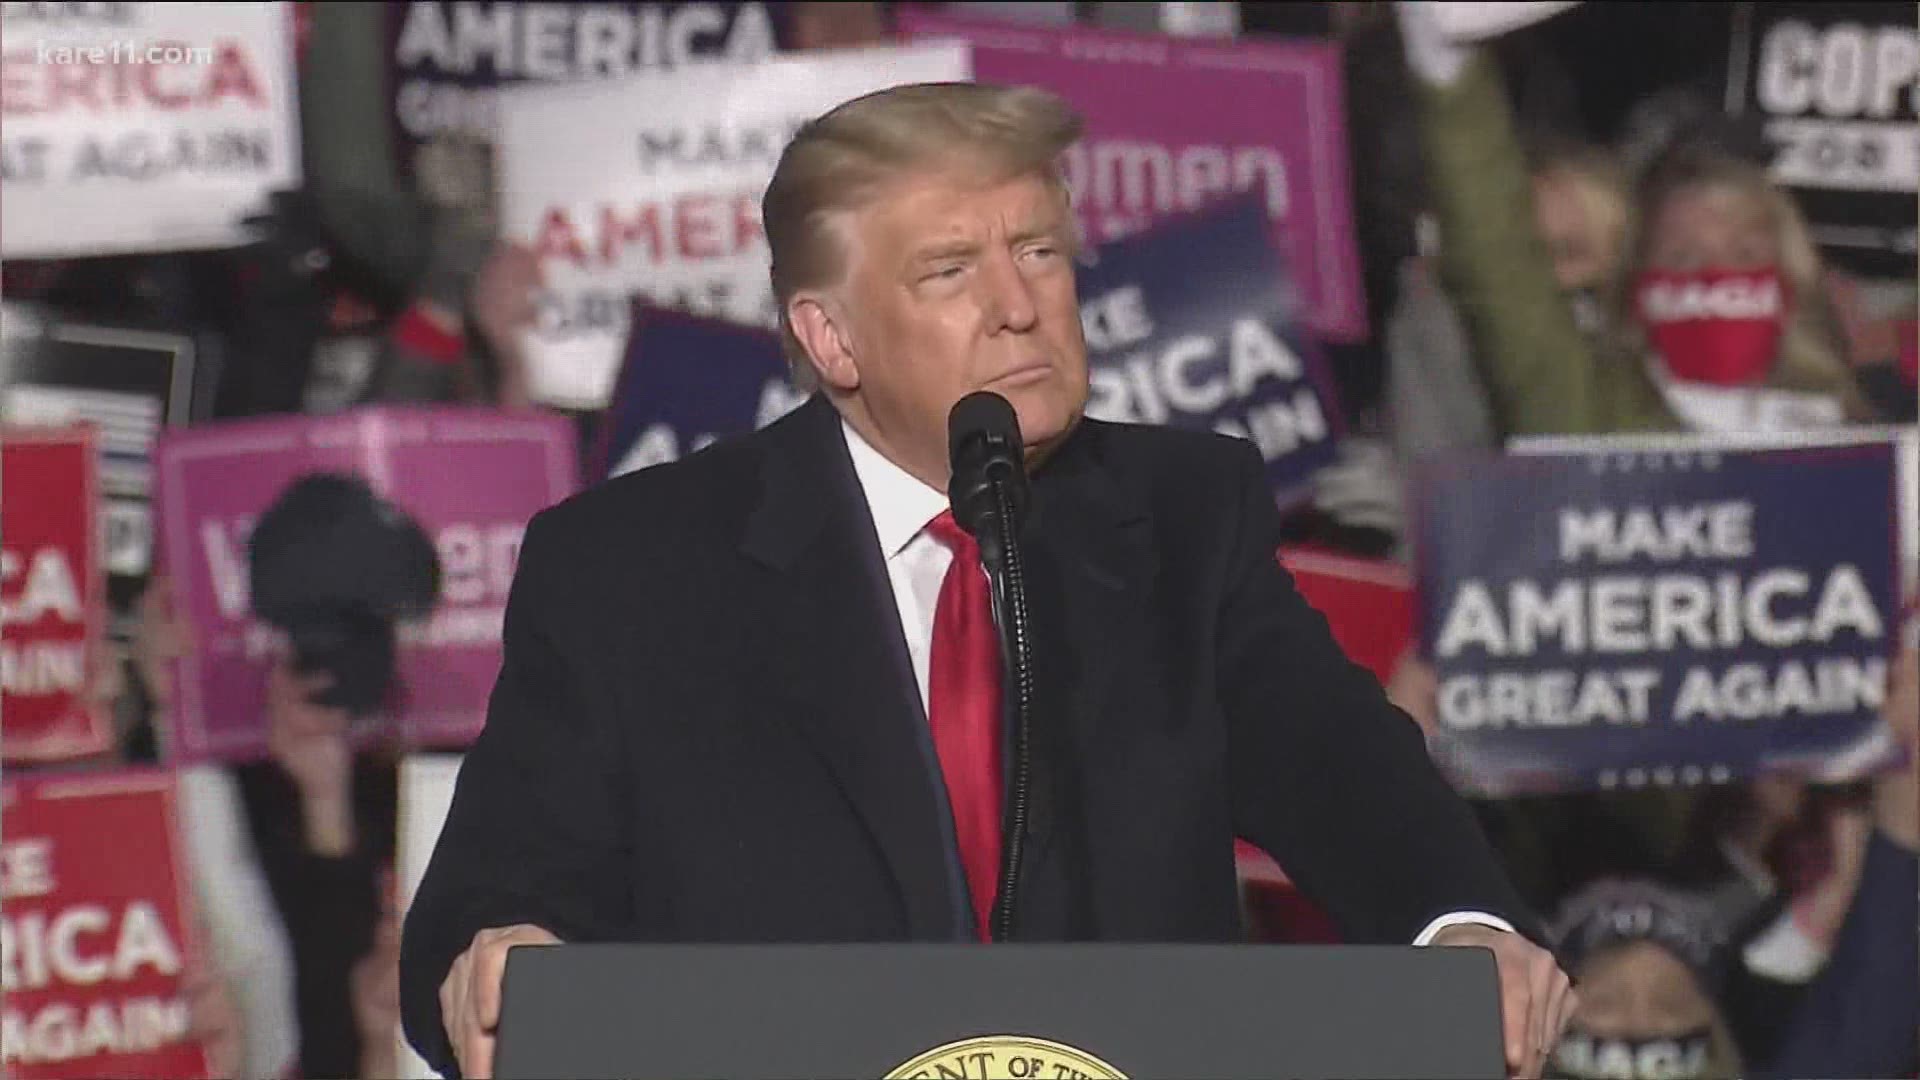 The president tweeted about it Tuesday, and mentioned it at a PA rally